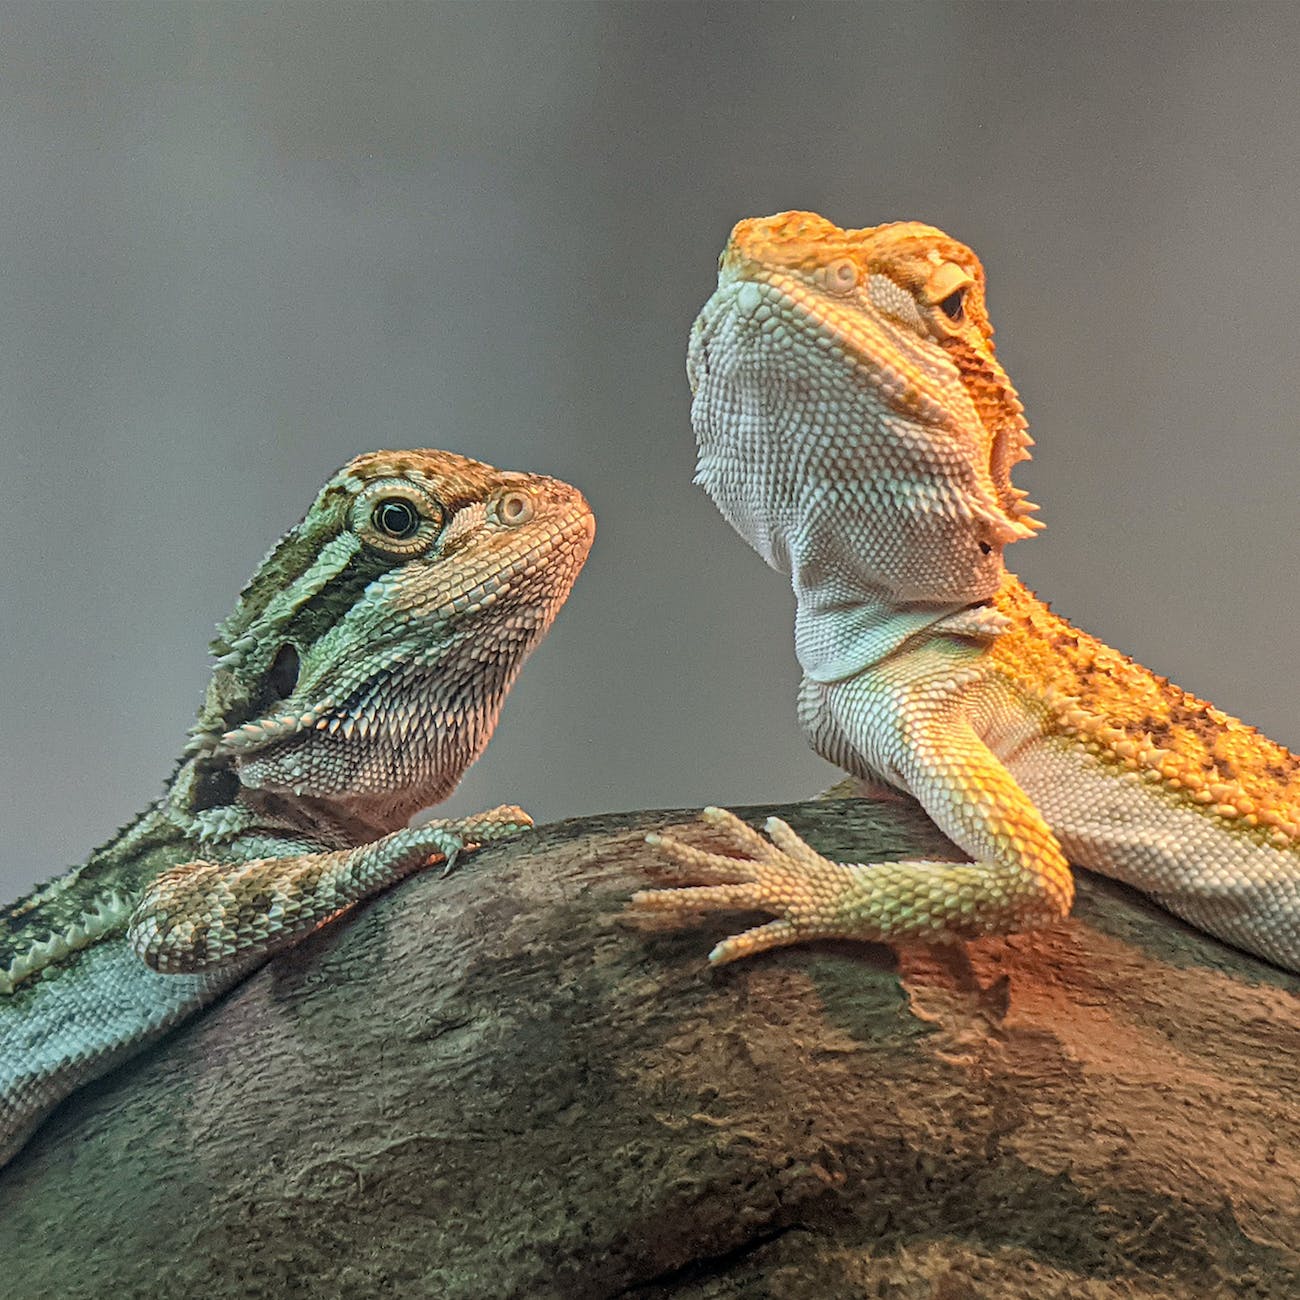 a two bearded dragons on the wood